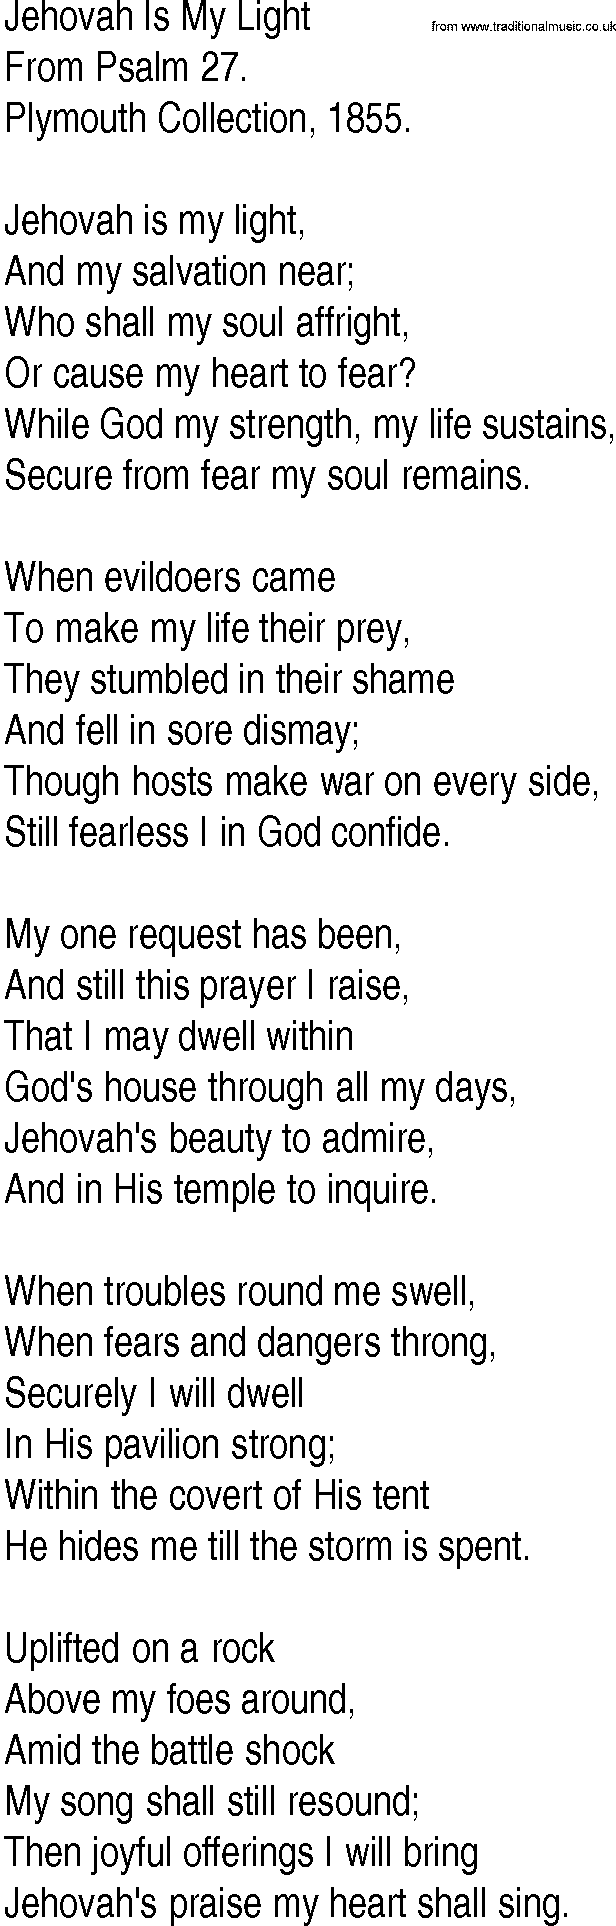 Hymn and Gospel Song: Jehovah Is My Light by From Psalm lyrics